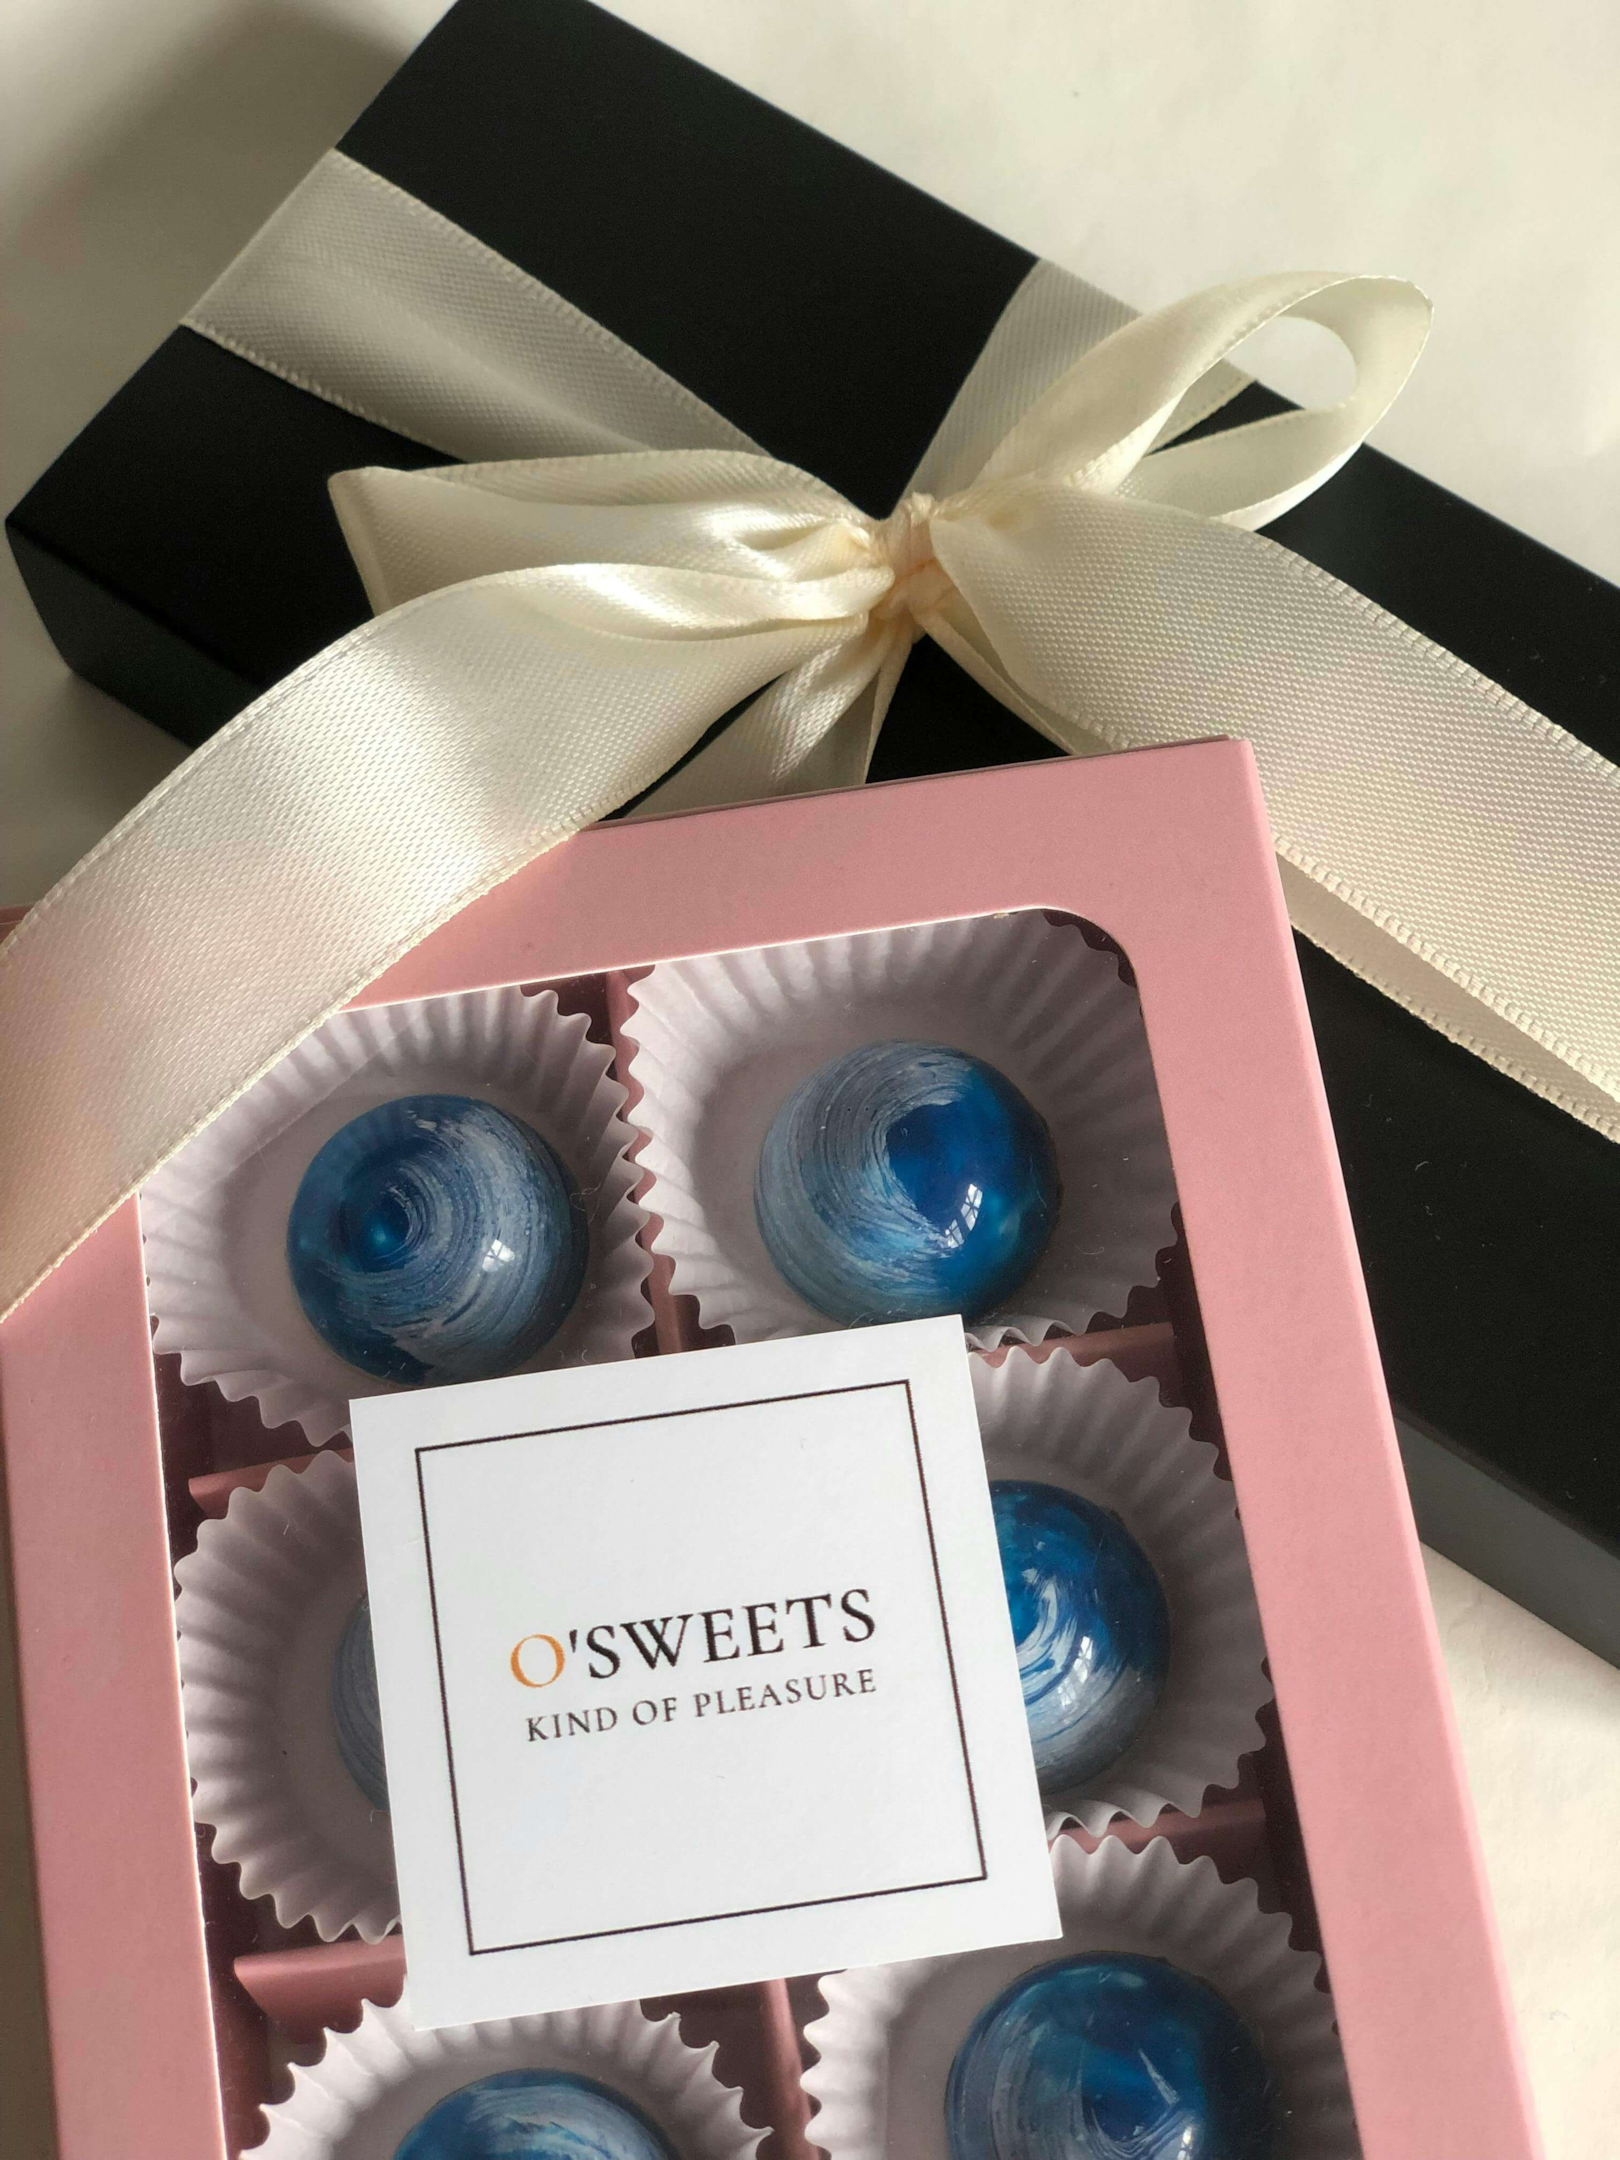 Pink box of glossy blue marbled chocolates with a white ribbon-tied black gift box on a light background, labeled 'O'Sweets Kind of Pleasure'